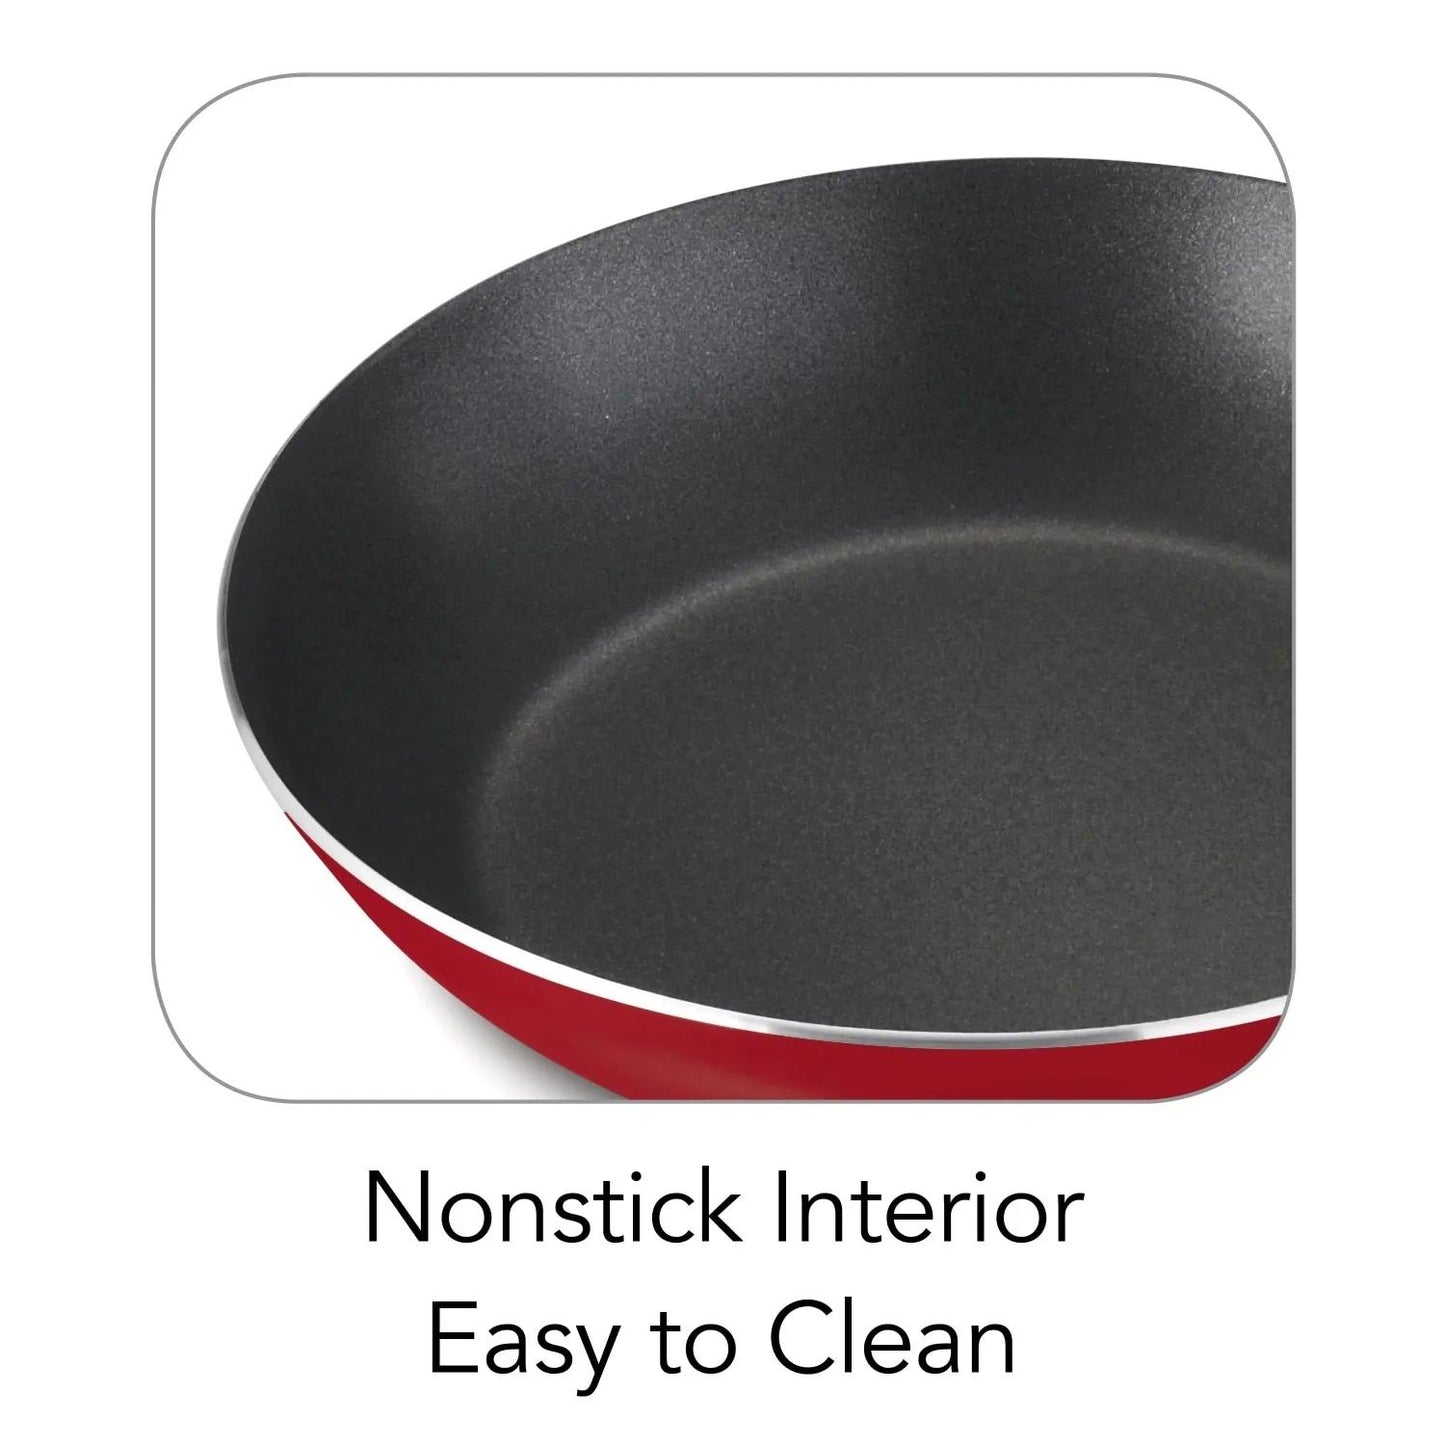 9-Piece Non-stick Cookware Set for Everyday Cooking